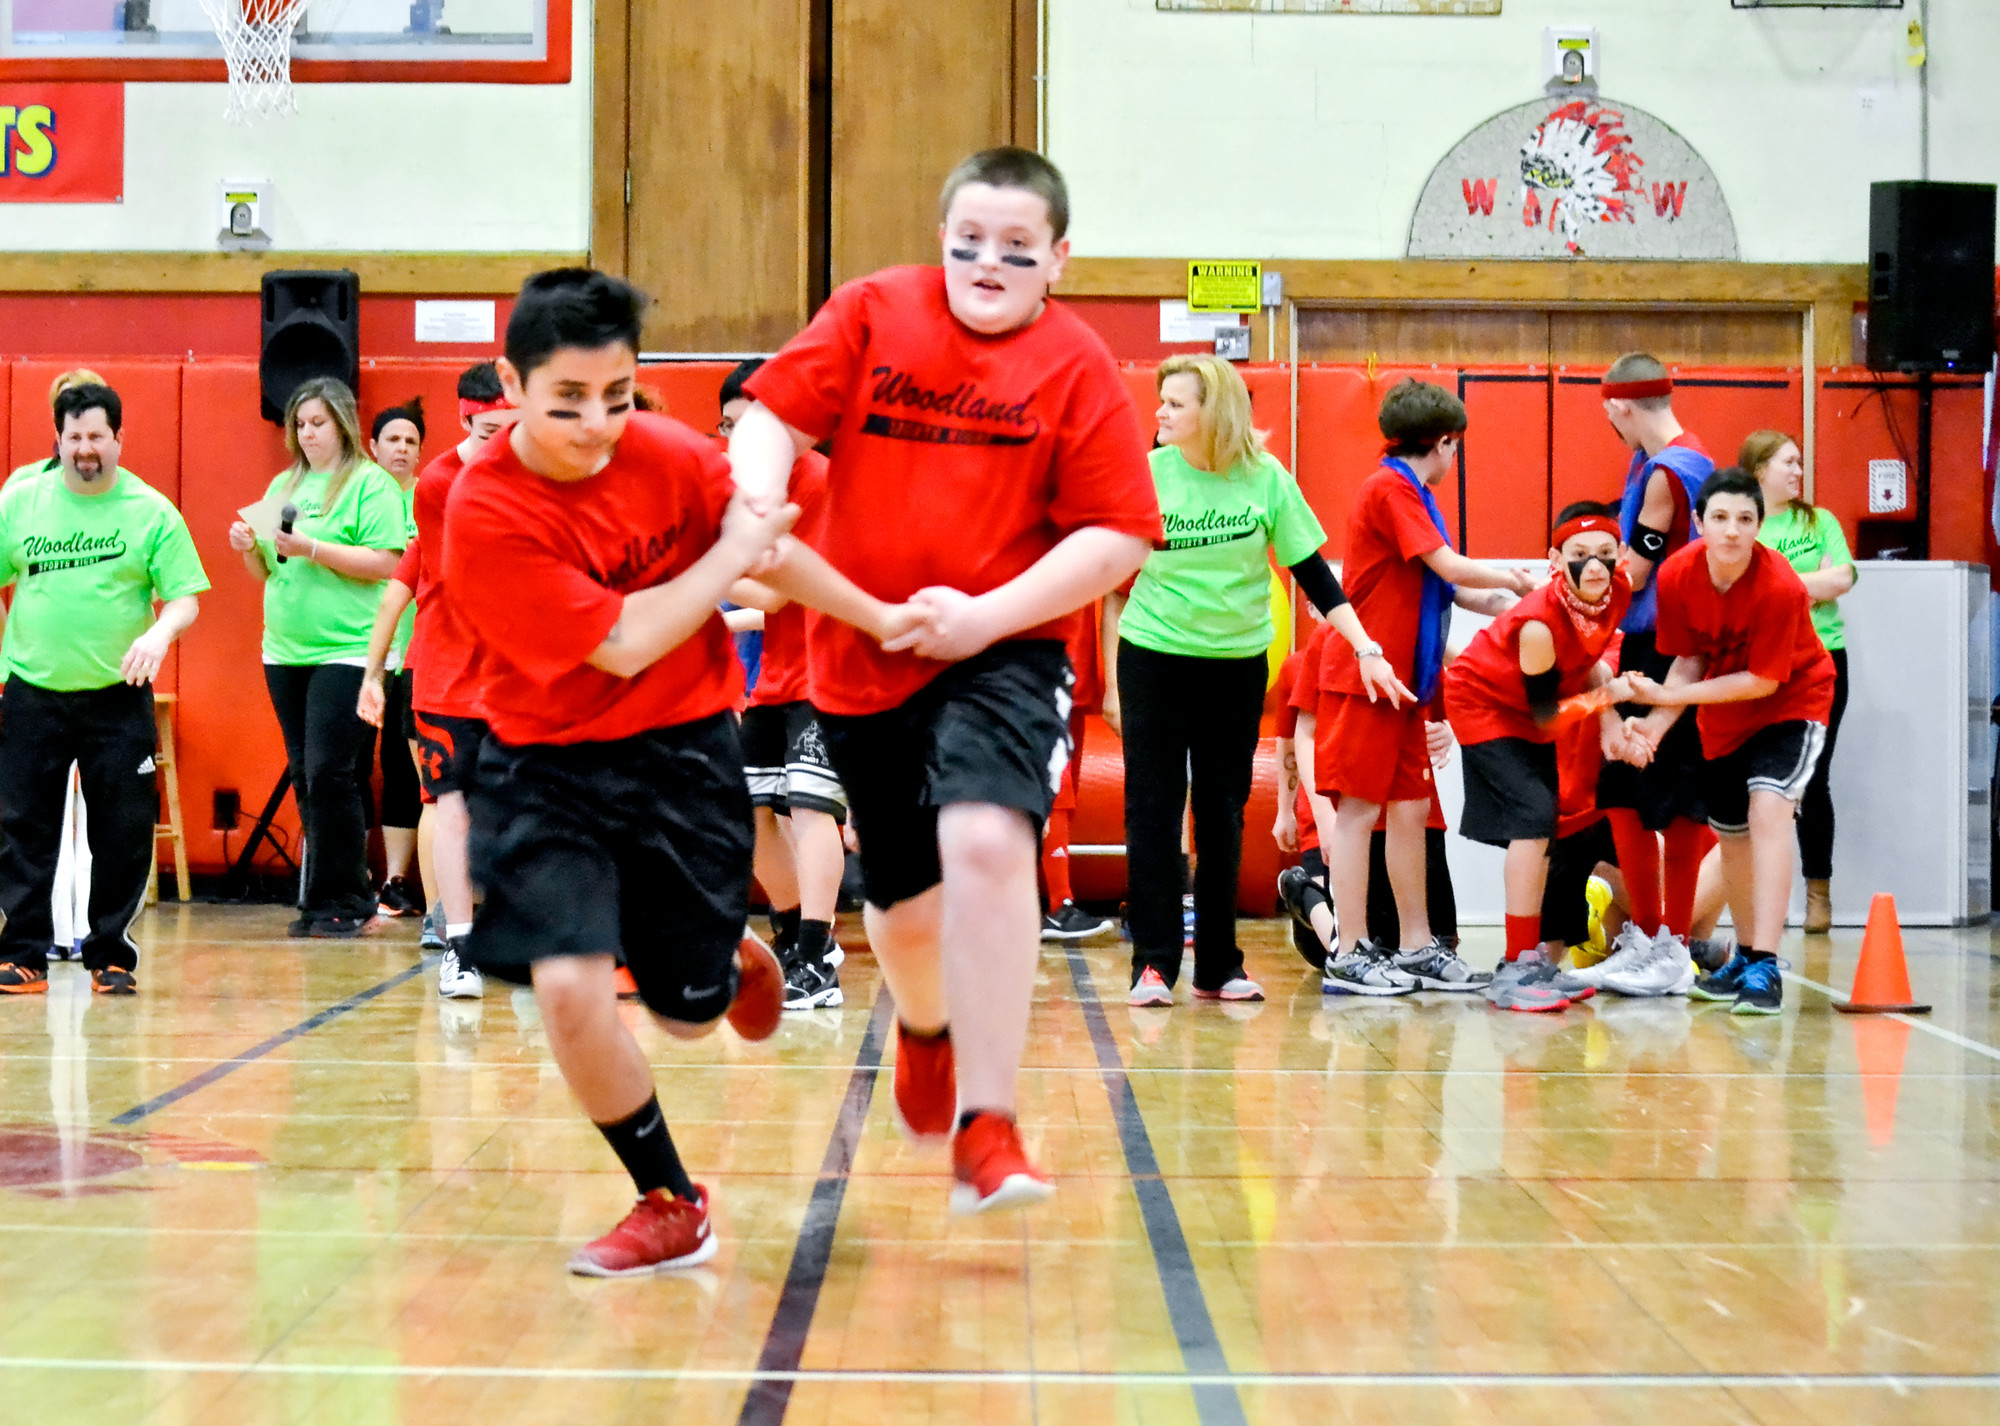 Andy Arrieta, far left, and Joe Monteleone raced in the partner relay at Woodland Middle School’s Sports Night last Thursday, a friendly competition among eighth-grade students.